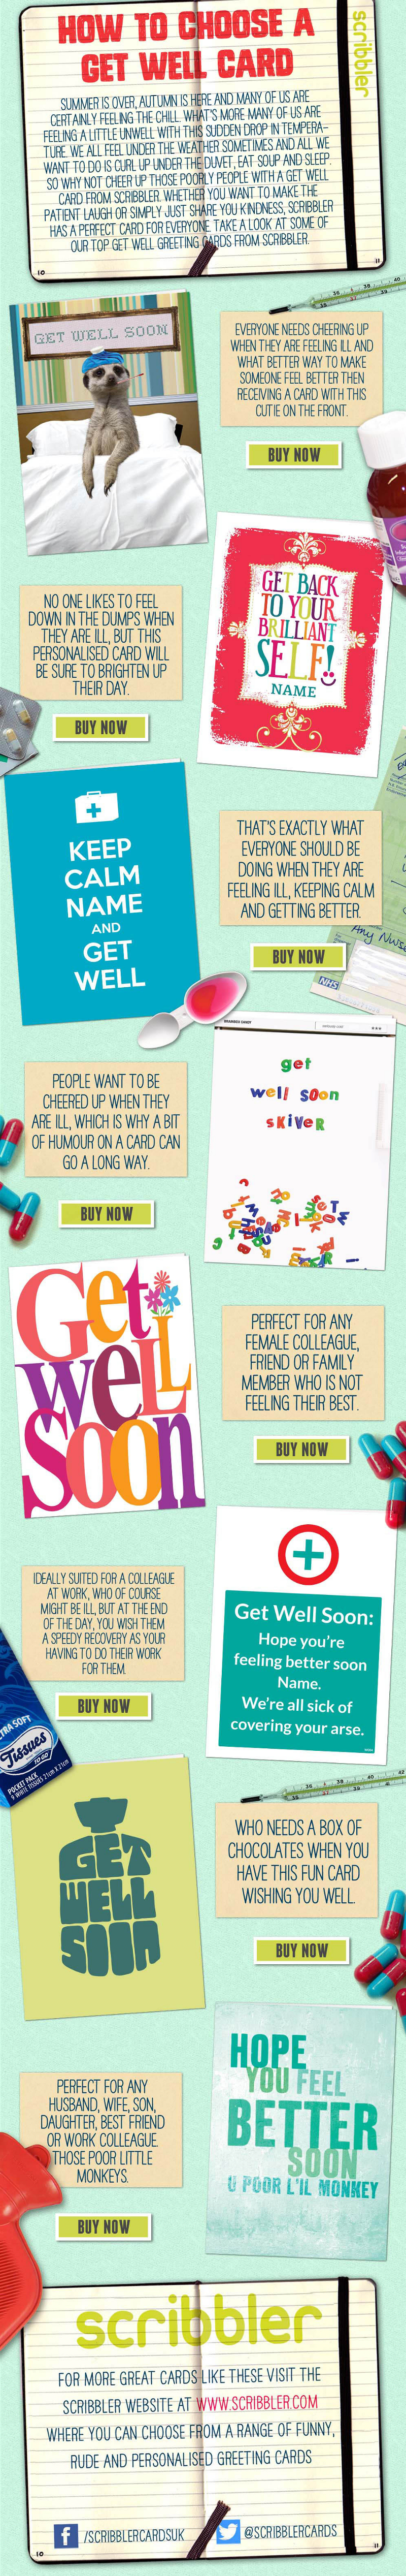 How to Choose a Get Well Card